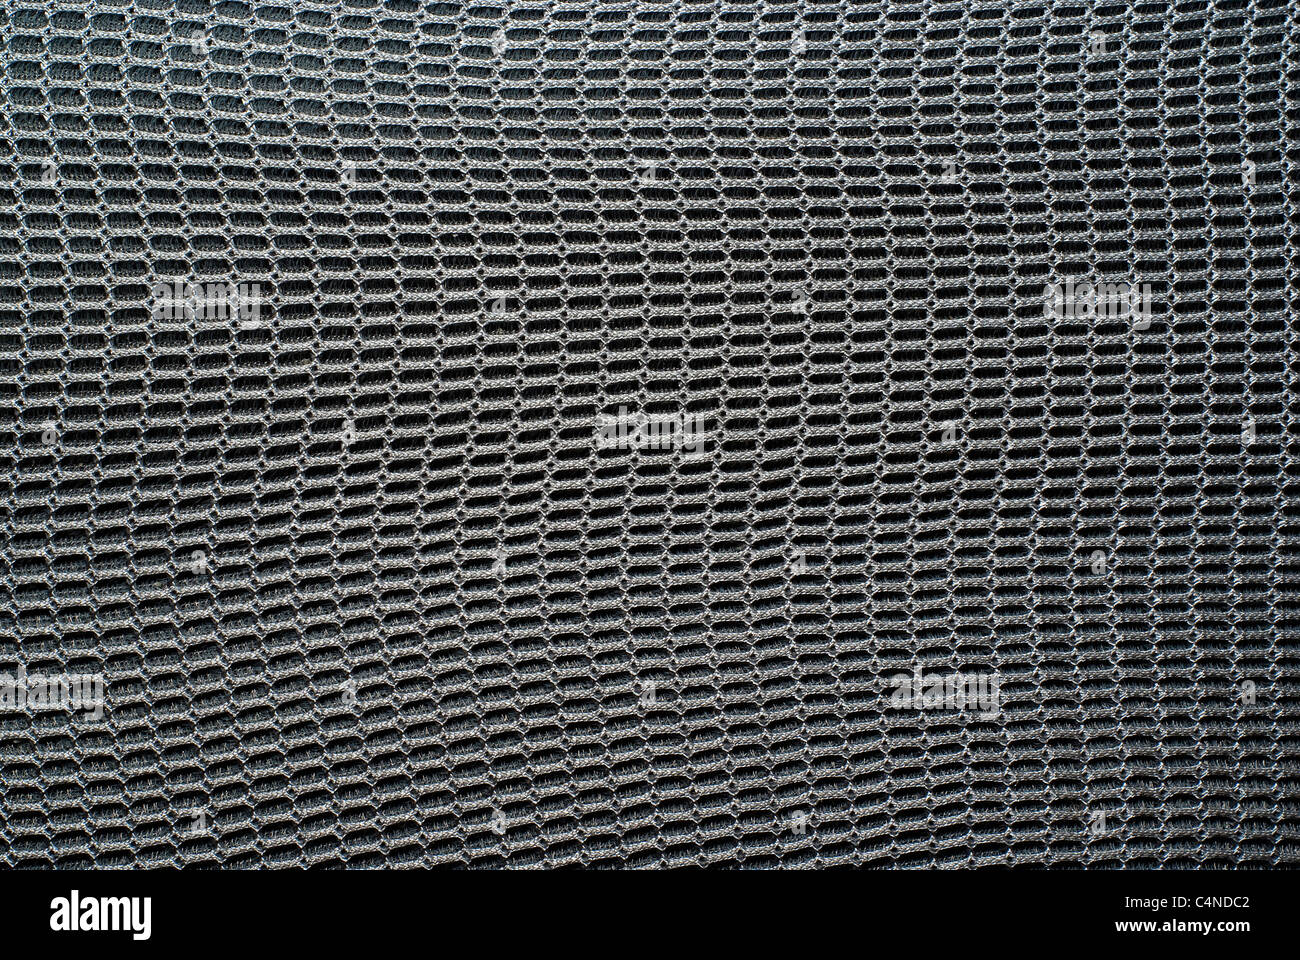 Close-up detail of a steel-like woven mail texture or background. Stock Photo